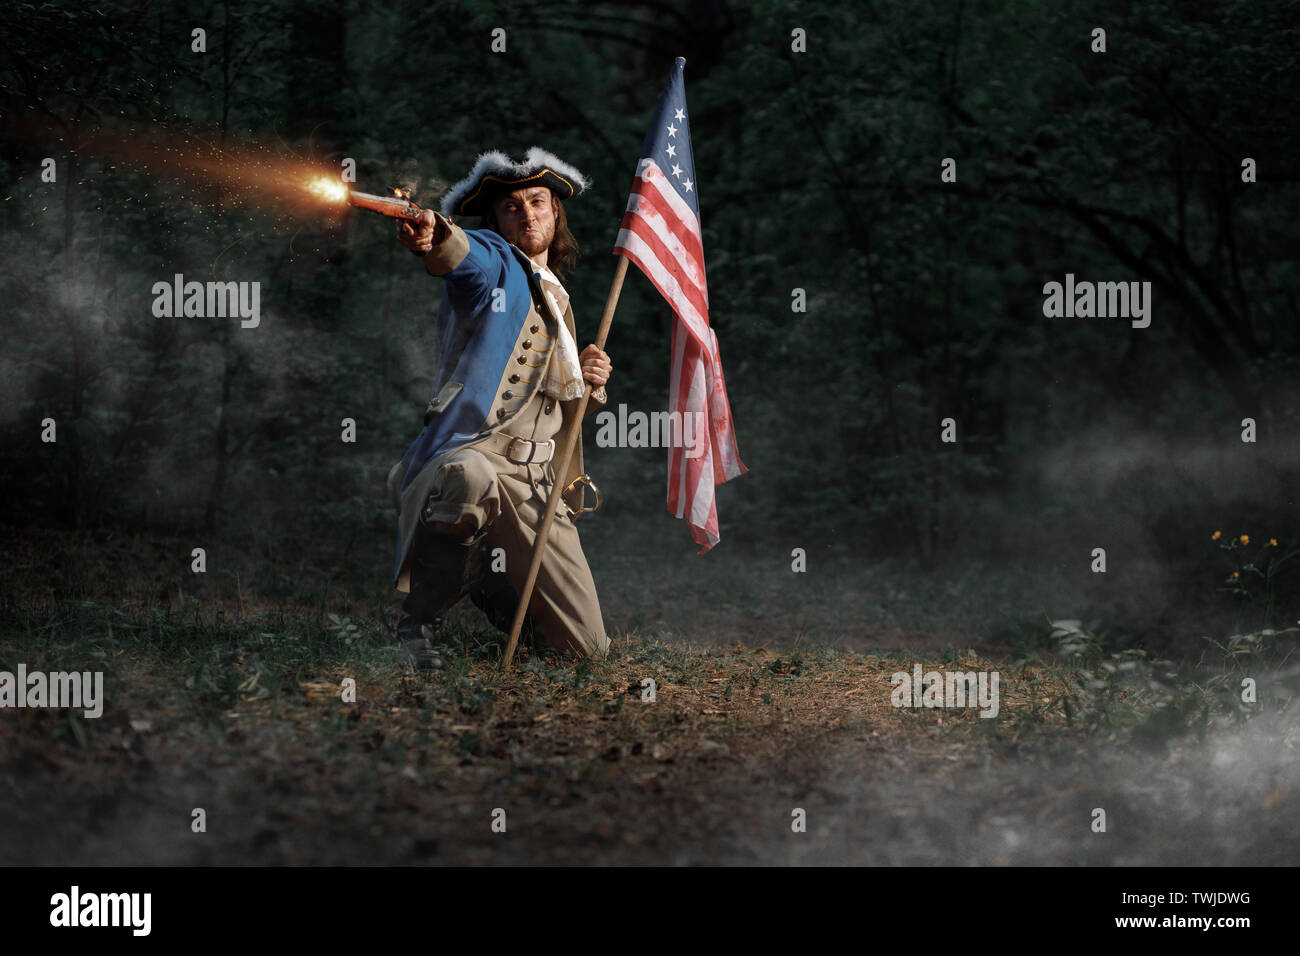 Man dressed as soldier of War of Independence United States aims from pistol with flag Stock Photo